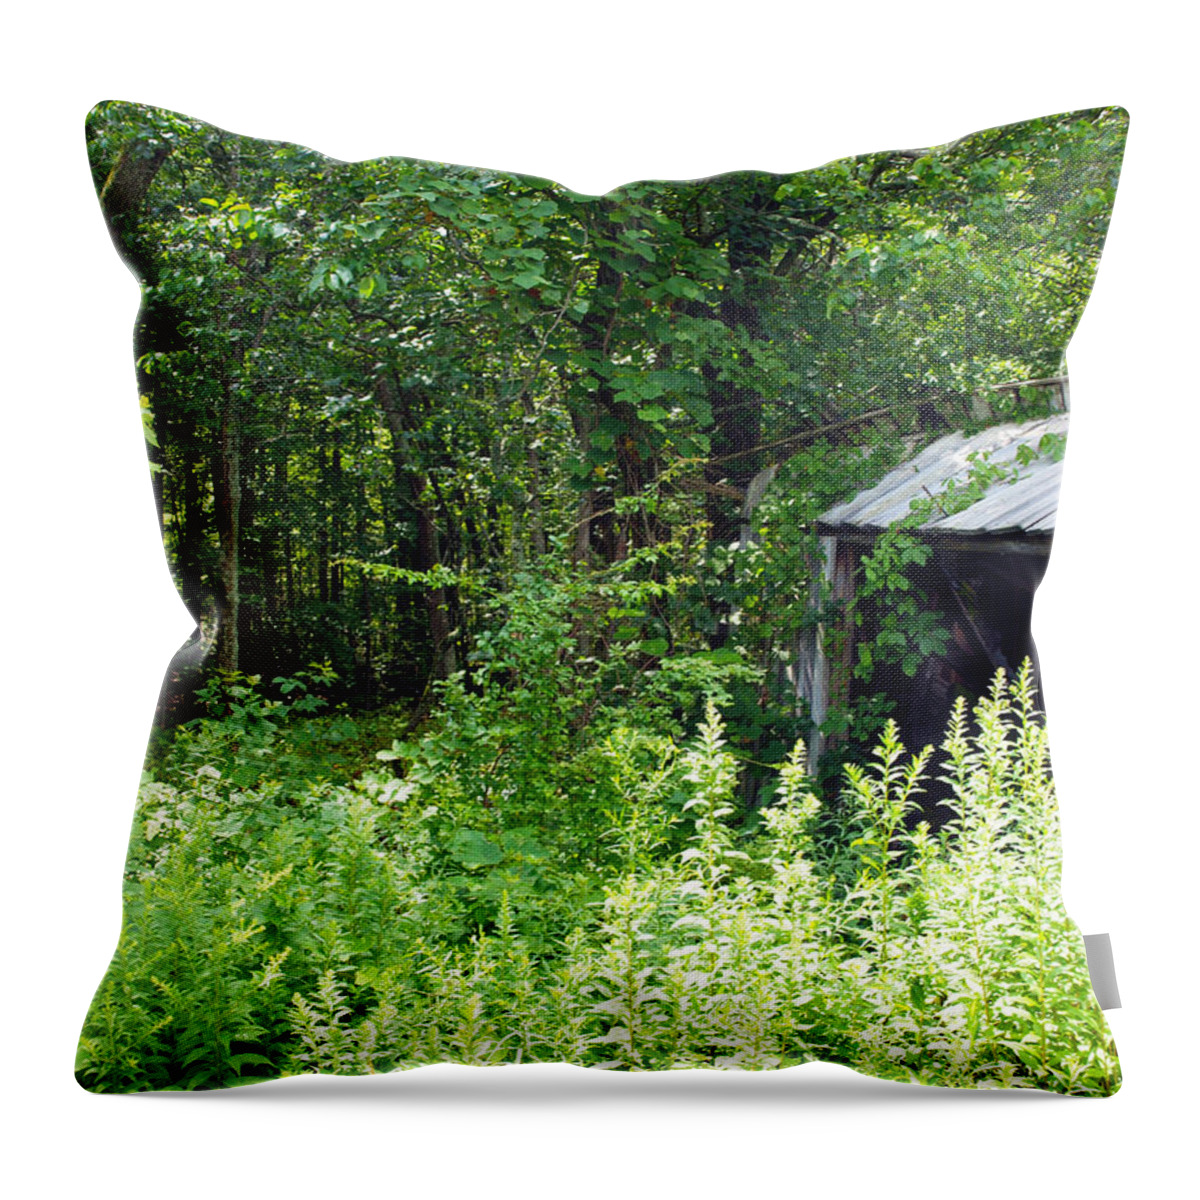 Farm Animals Throw Pillow featuring the photograph A Broken Down Farm Building #1 by Robert Margetts